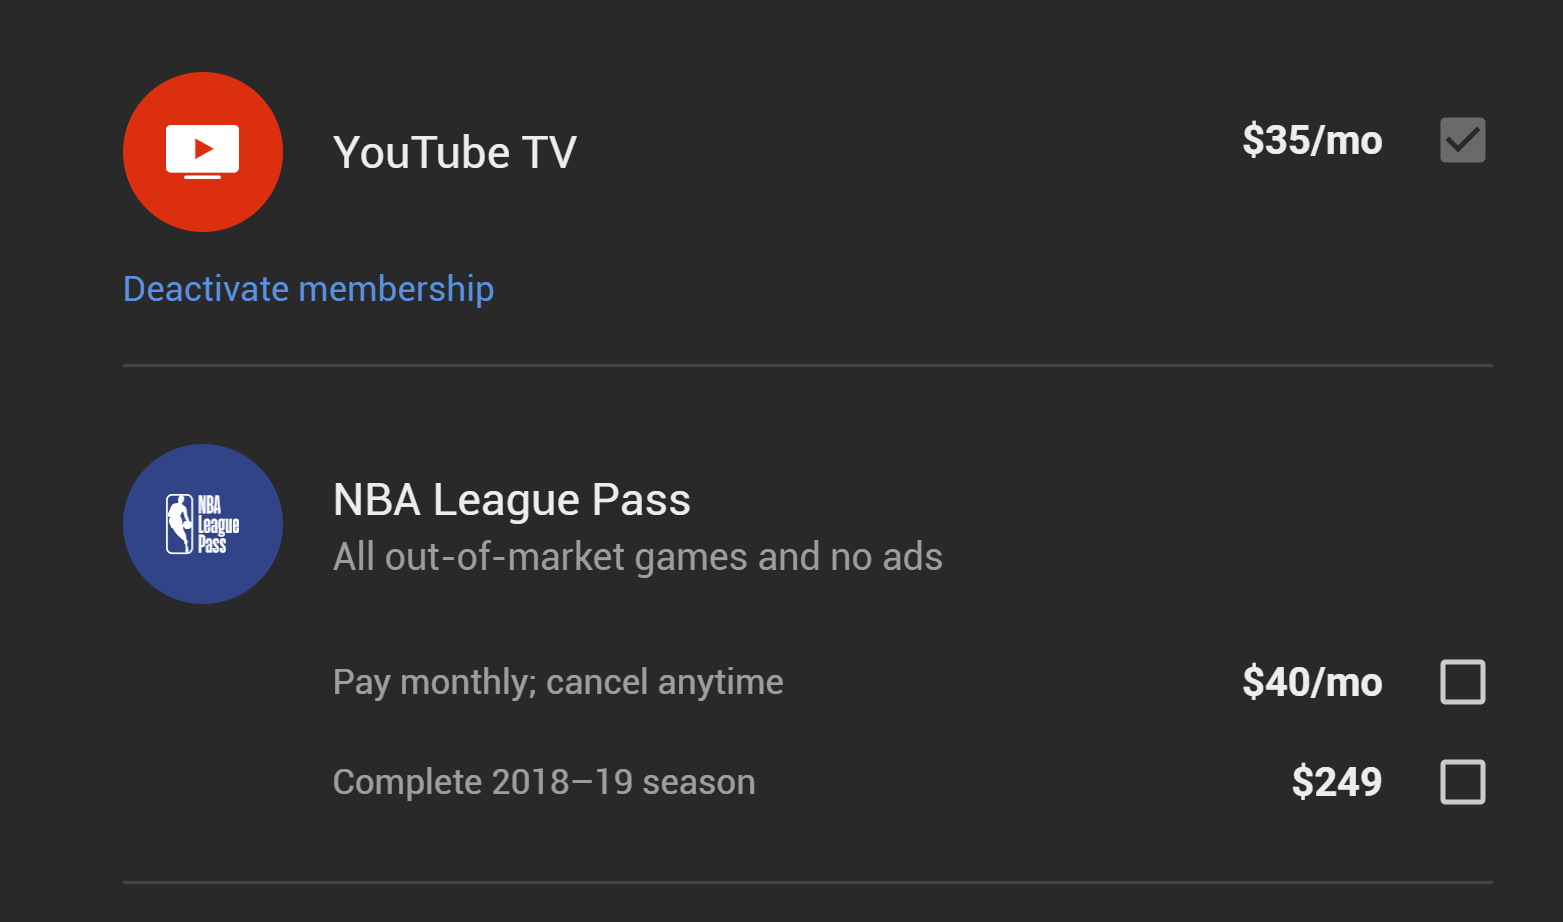 NBA League Pass now available through YouTube TV for $40 per month